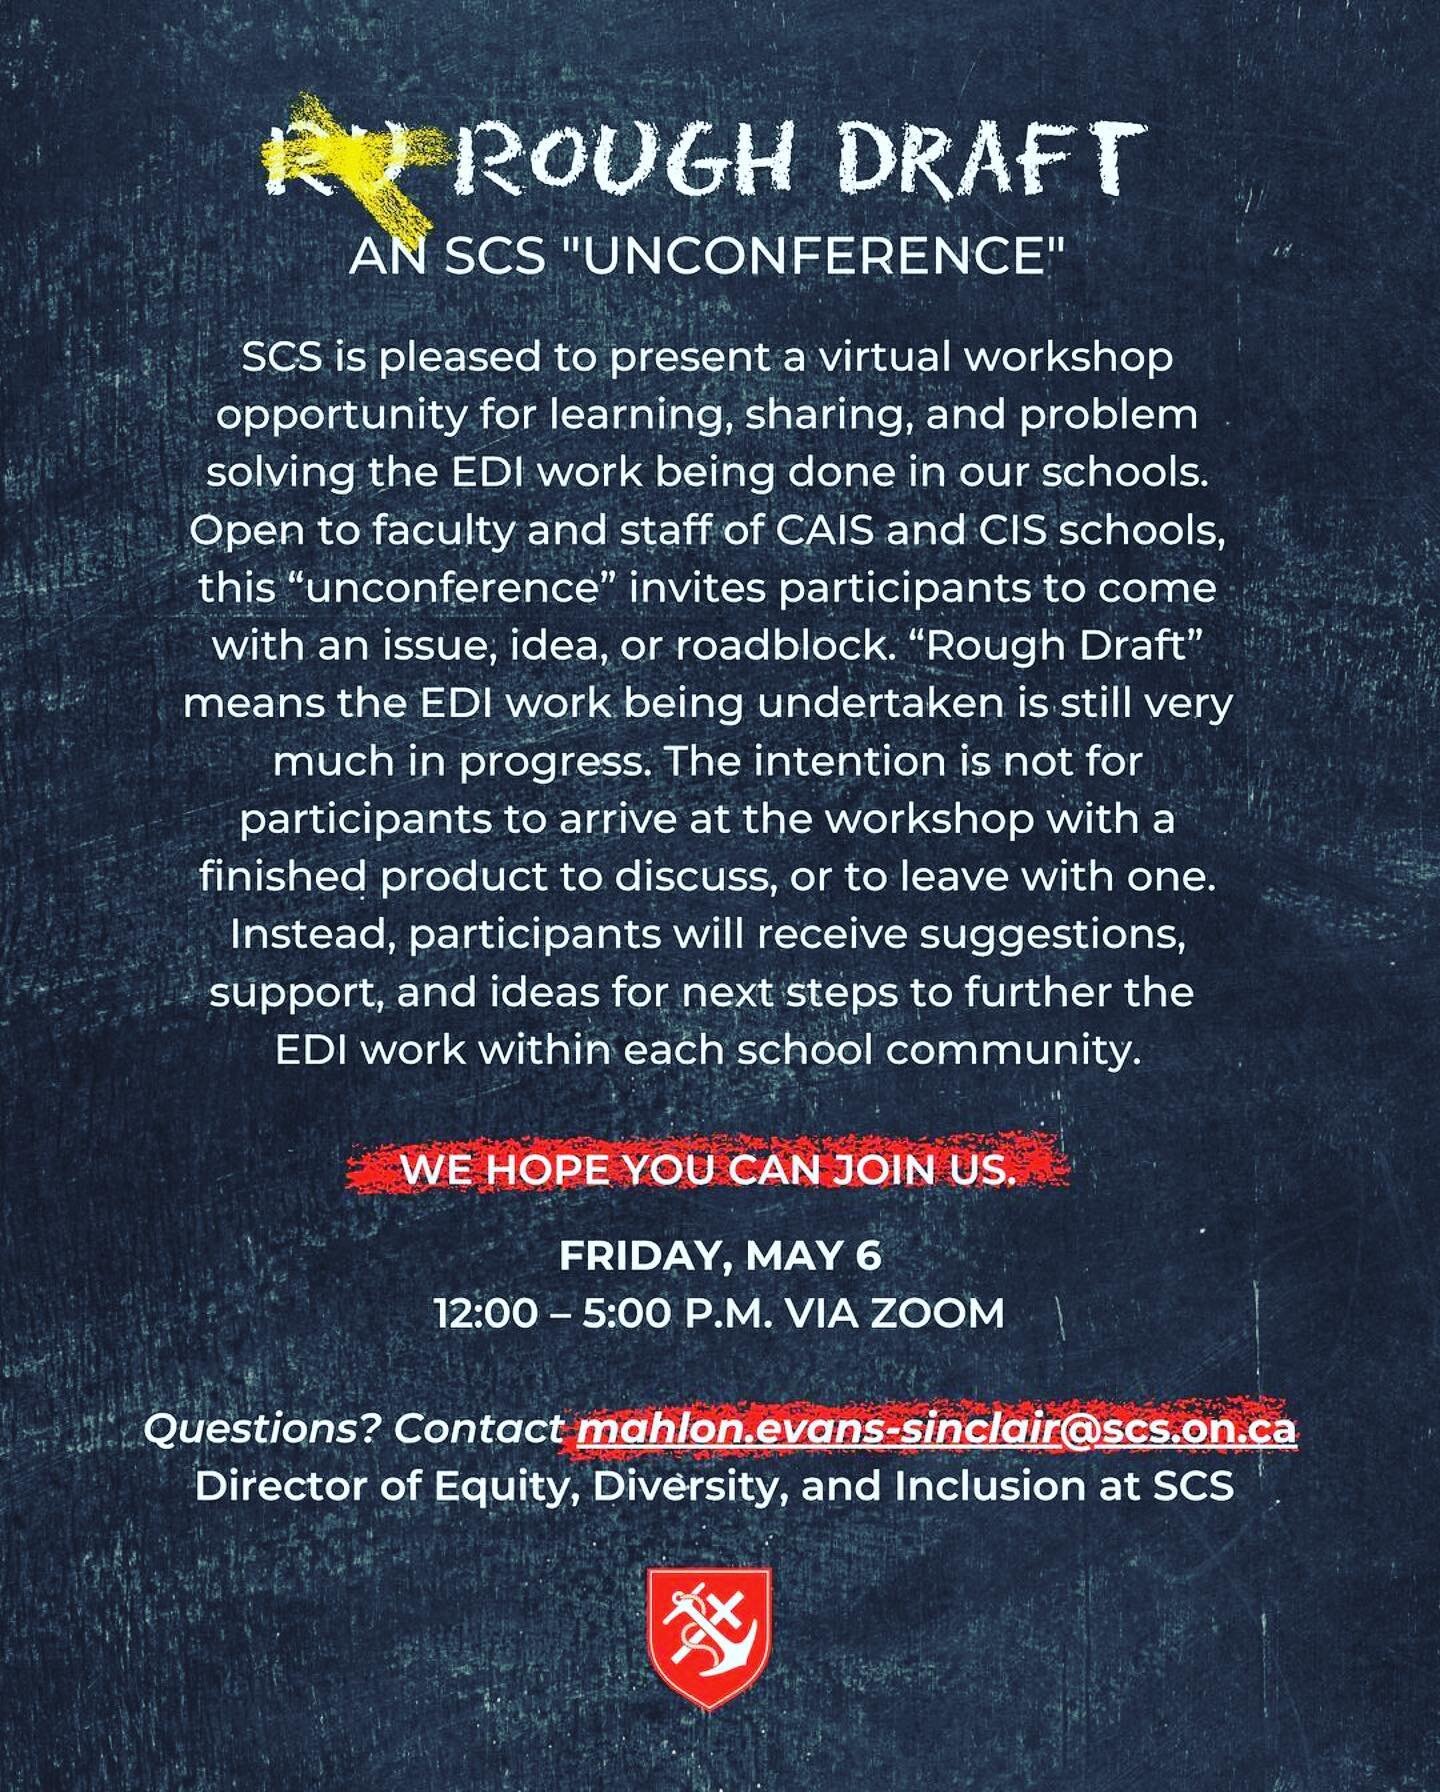 On Friday, May 6 from 12:00-5:00 p.m., SCS (@stclementsschool) is pleased to present a virtual workshop opportunity for learning, sharing, and problem solving the EDI work being done in our schools. Open to faculty and staff of @cais_schools and @cis